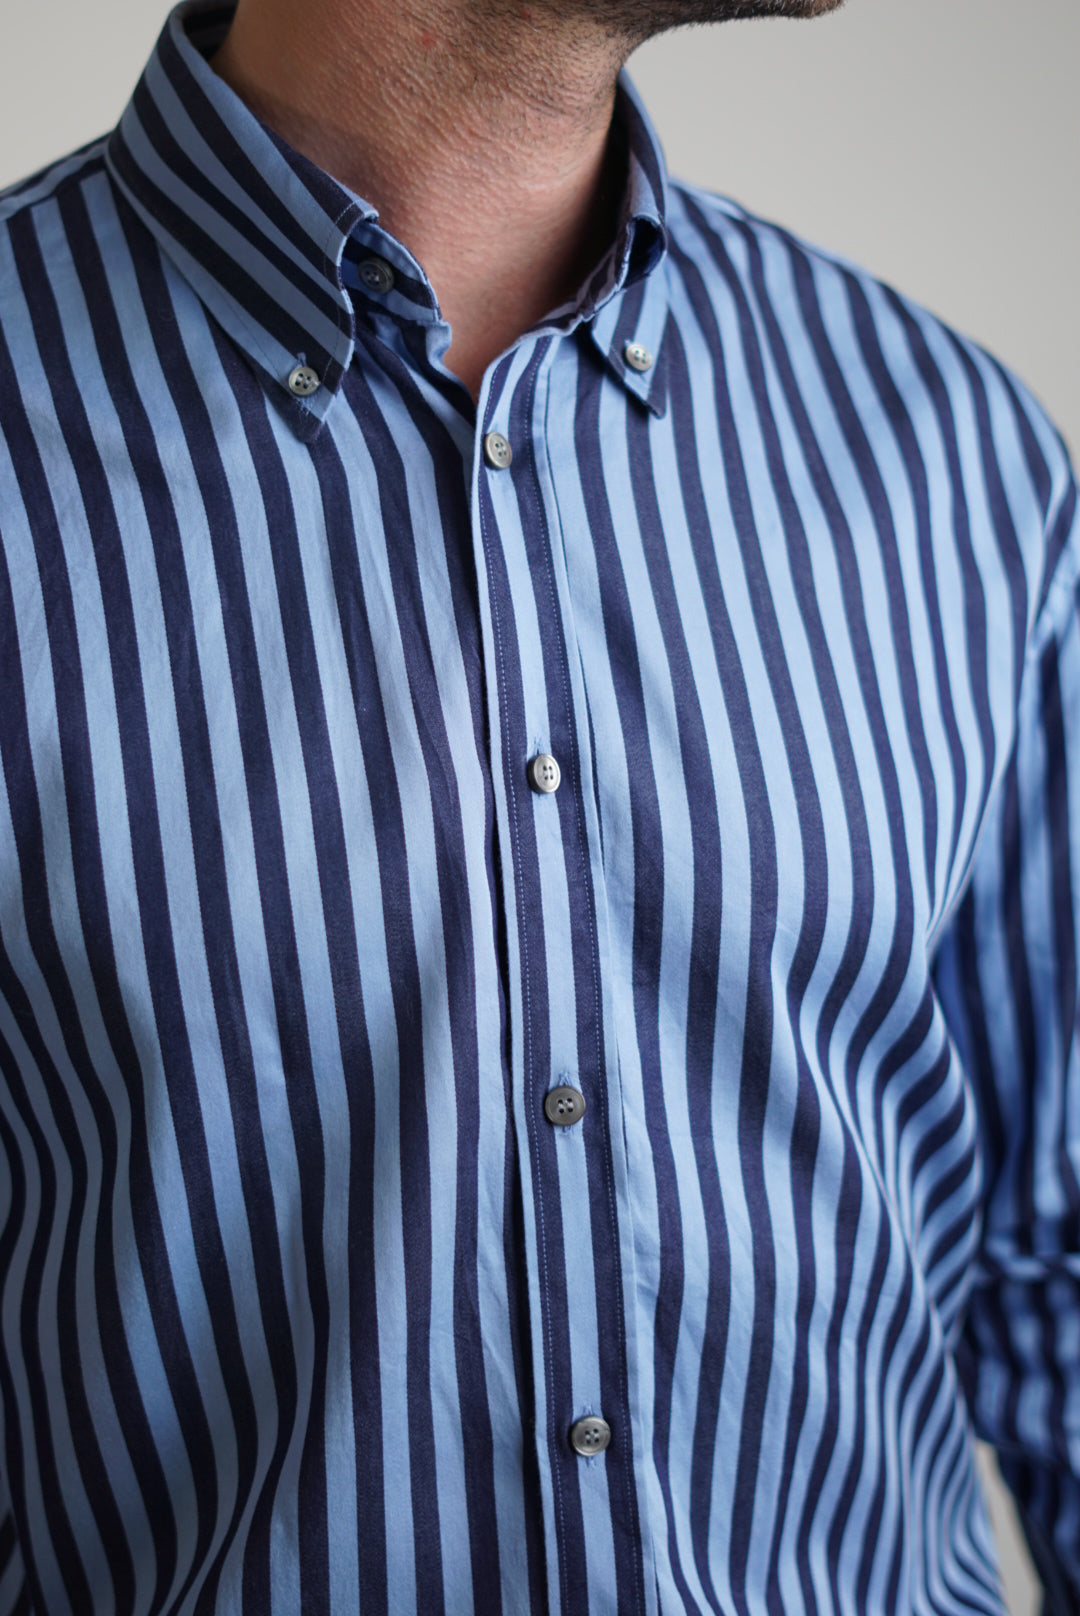 Tiger of Sweden Blue and Navy Striped Slim Cotton Shirt